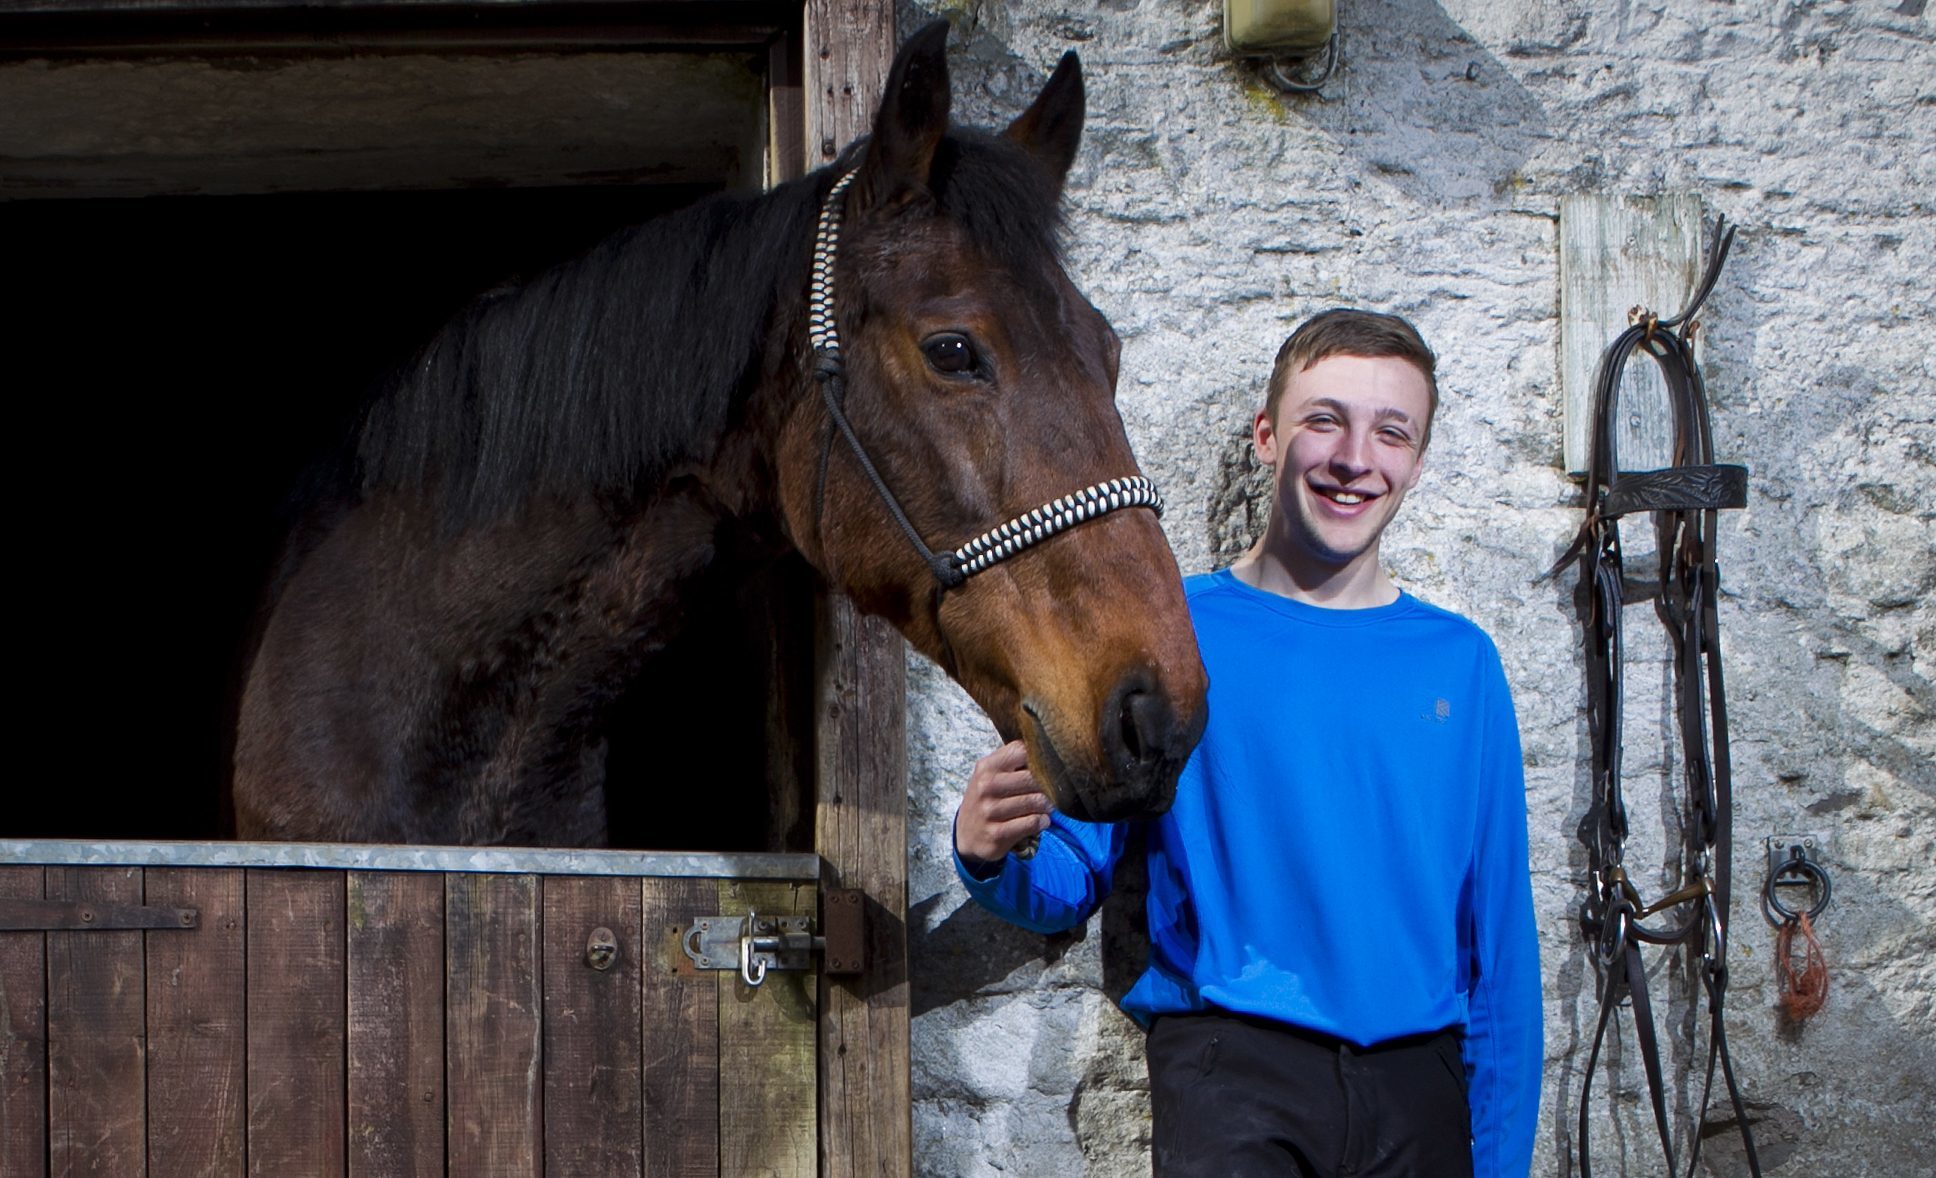 Timo Condie has turned his life around on horseback (Andrew Cawley / DC Thomson)